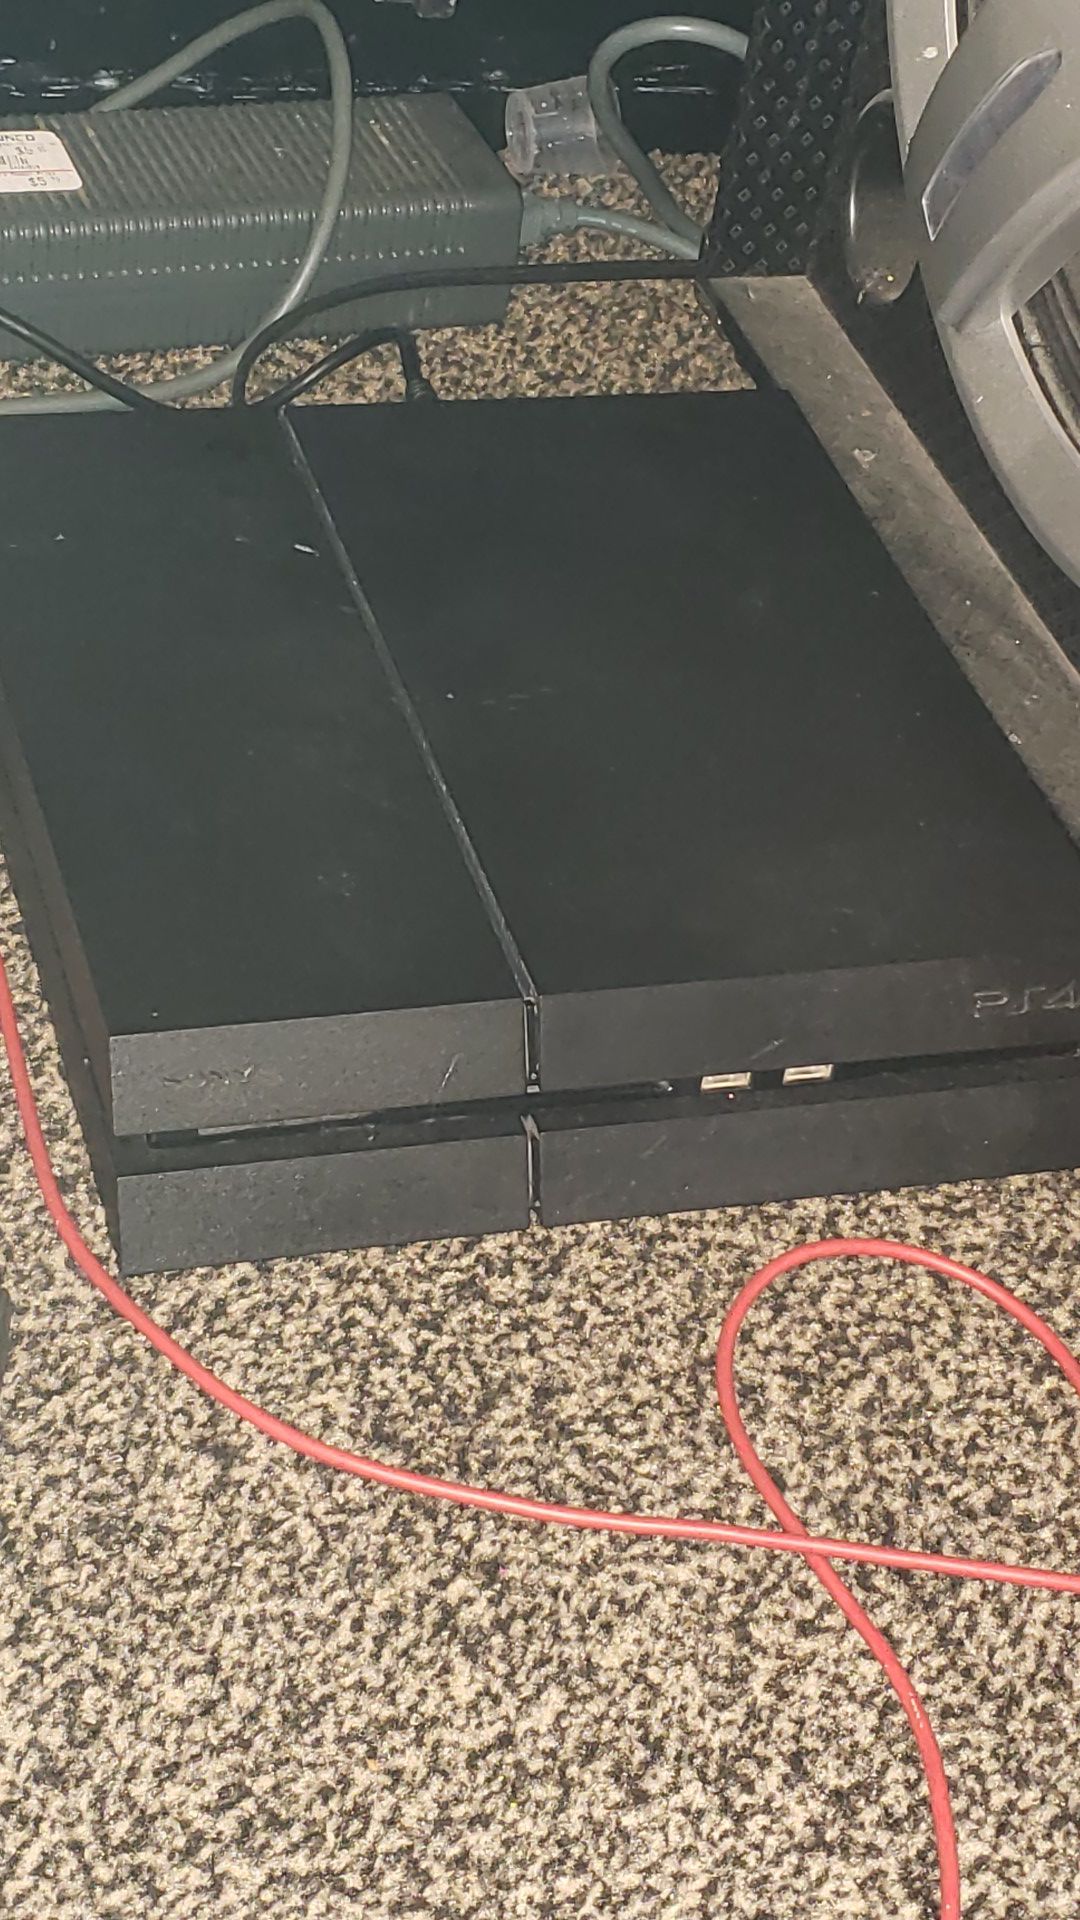 Ps4 for parts